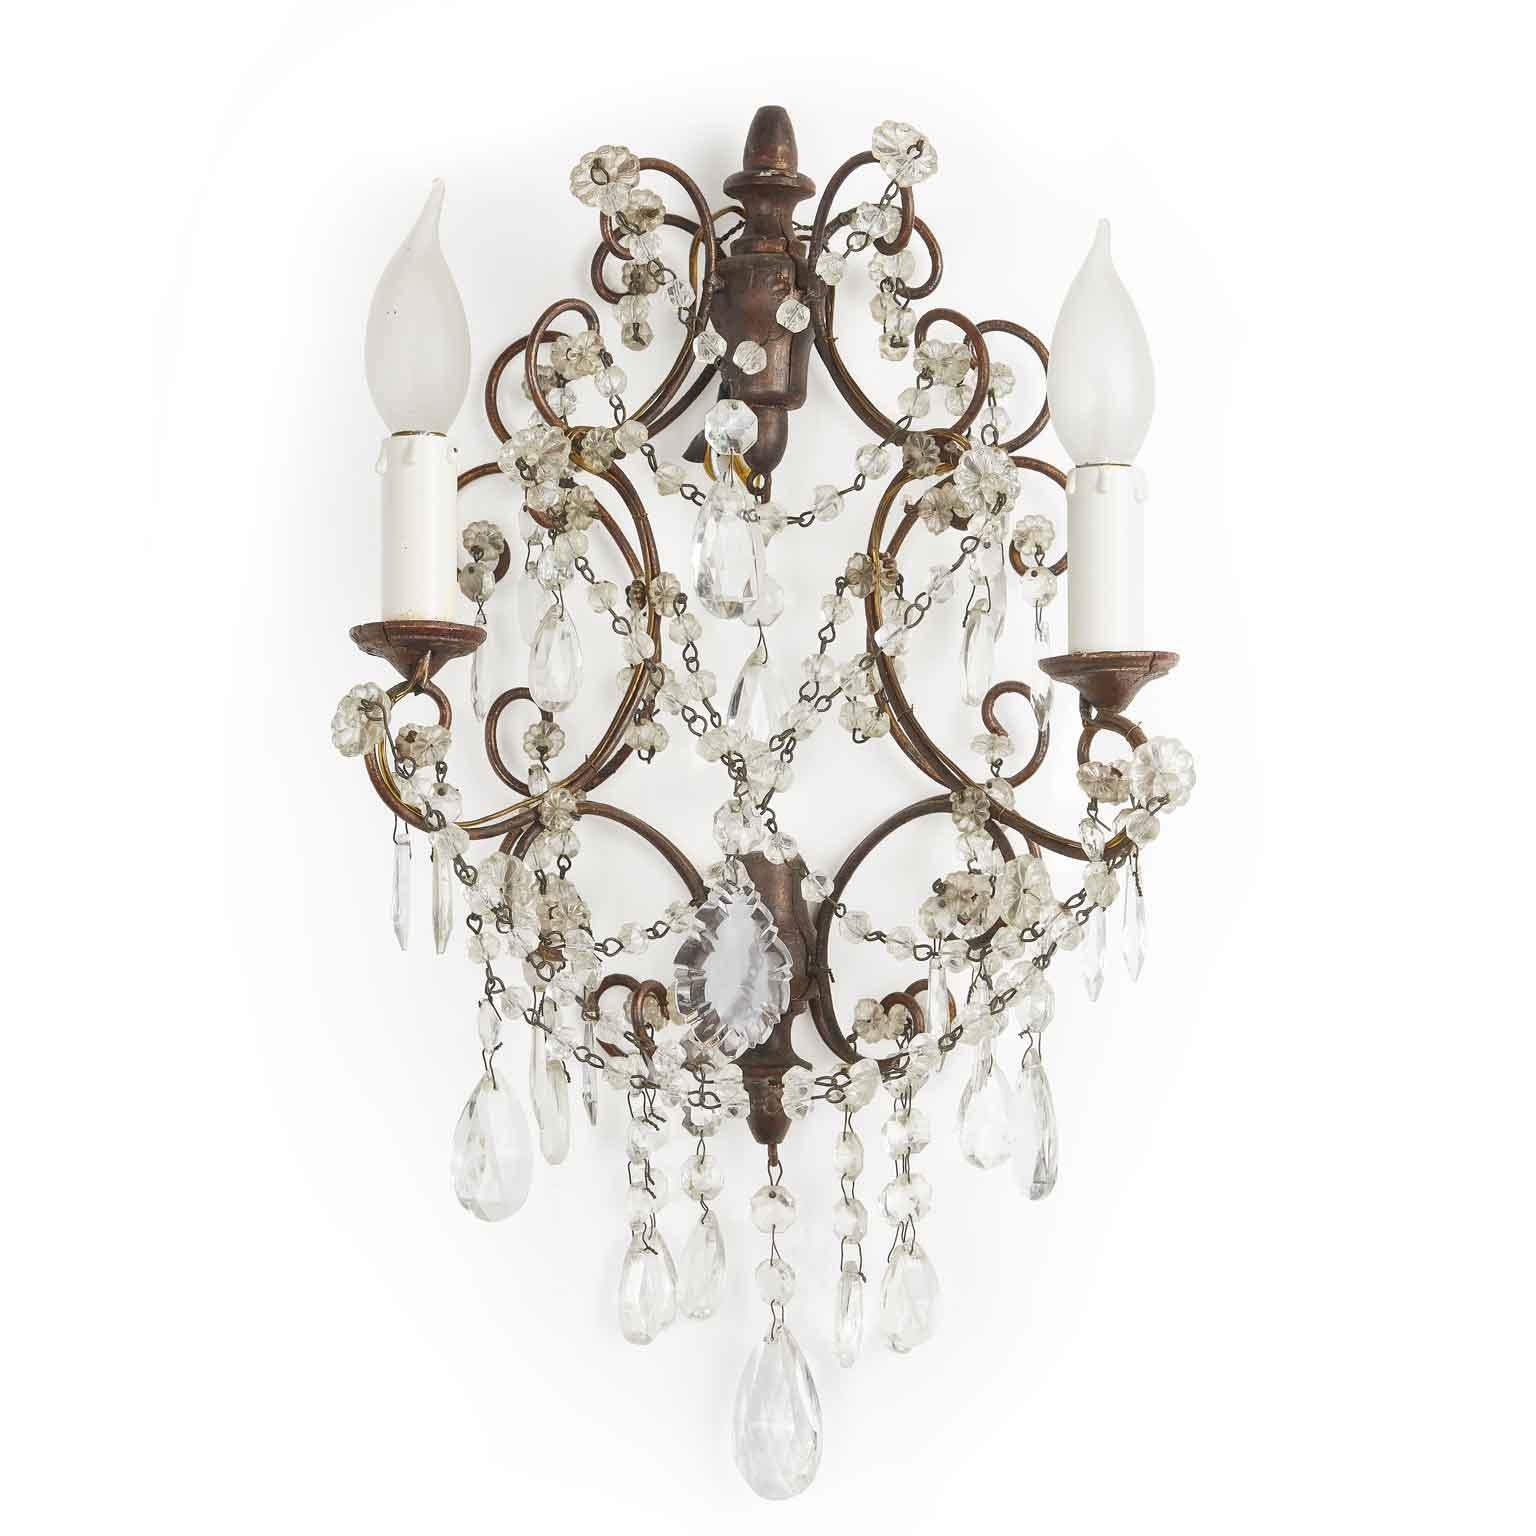 Patinated Pair of Italian Iron and Crystal Sconces from Tuscany 1950s